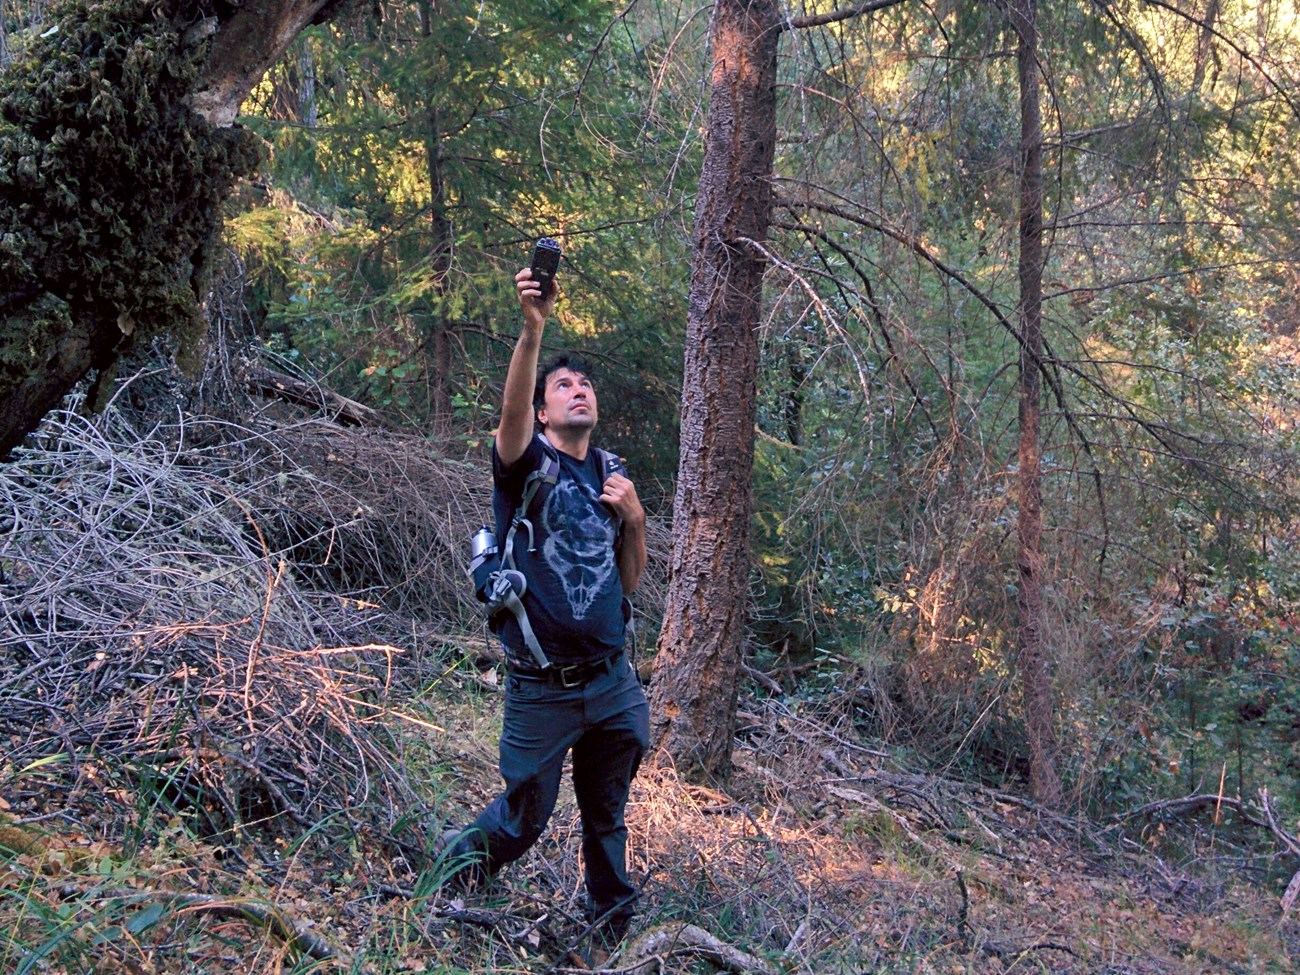 Person in the forest holding up an electronic device over his head.